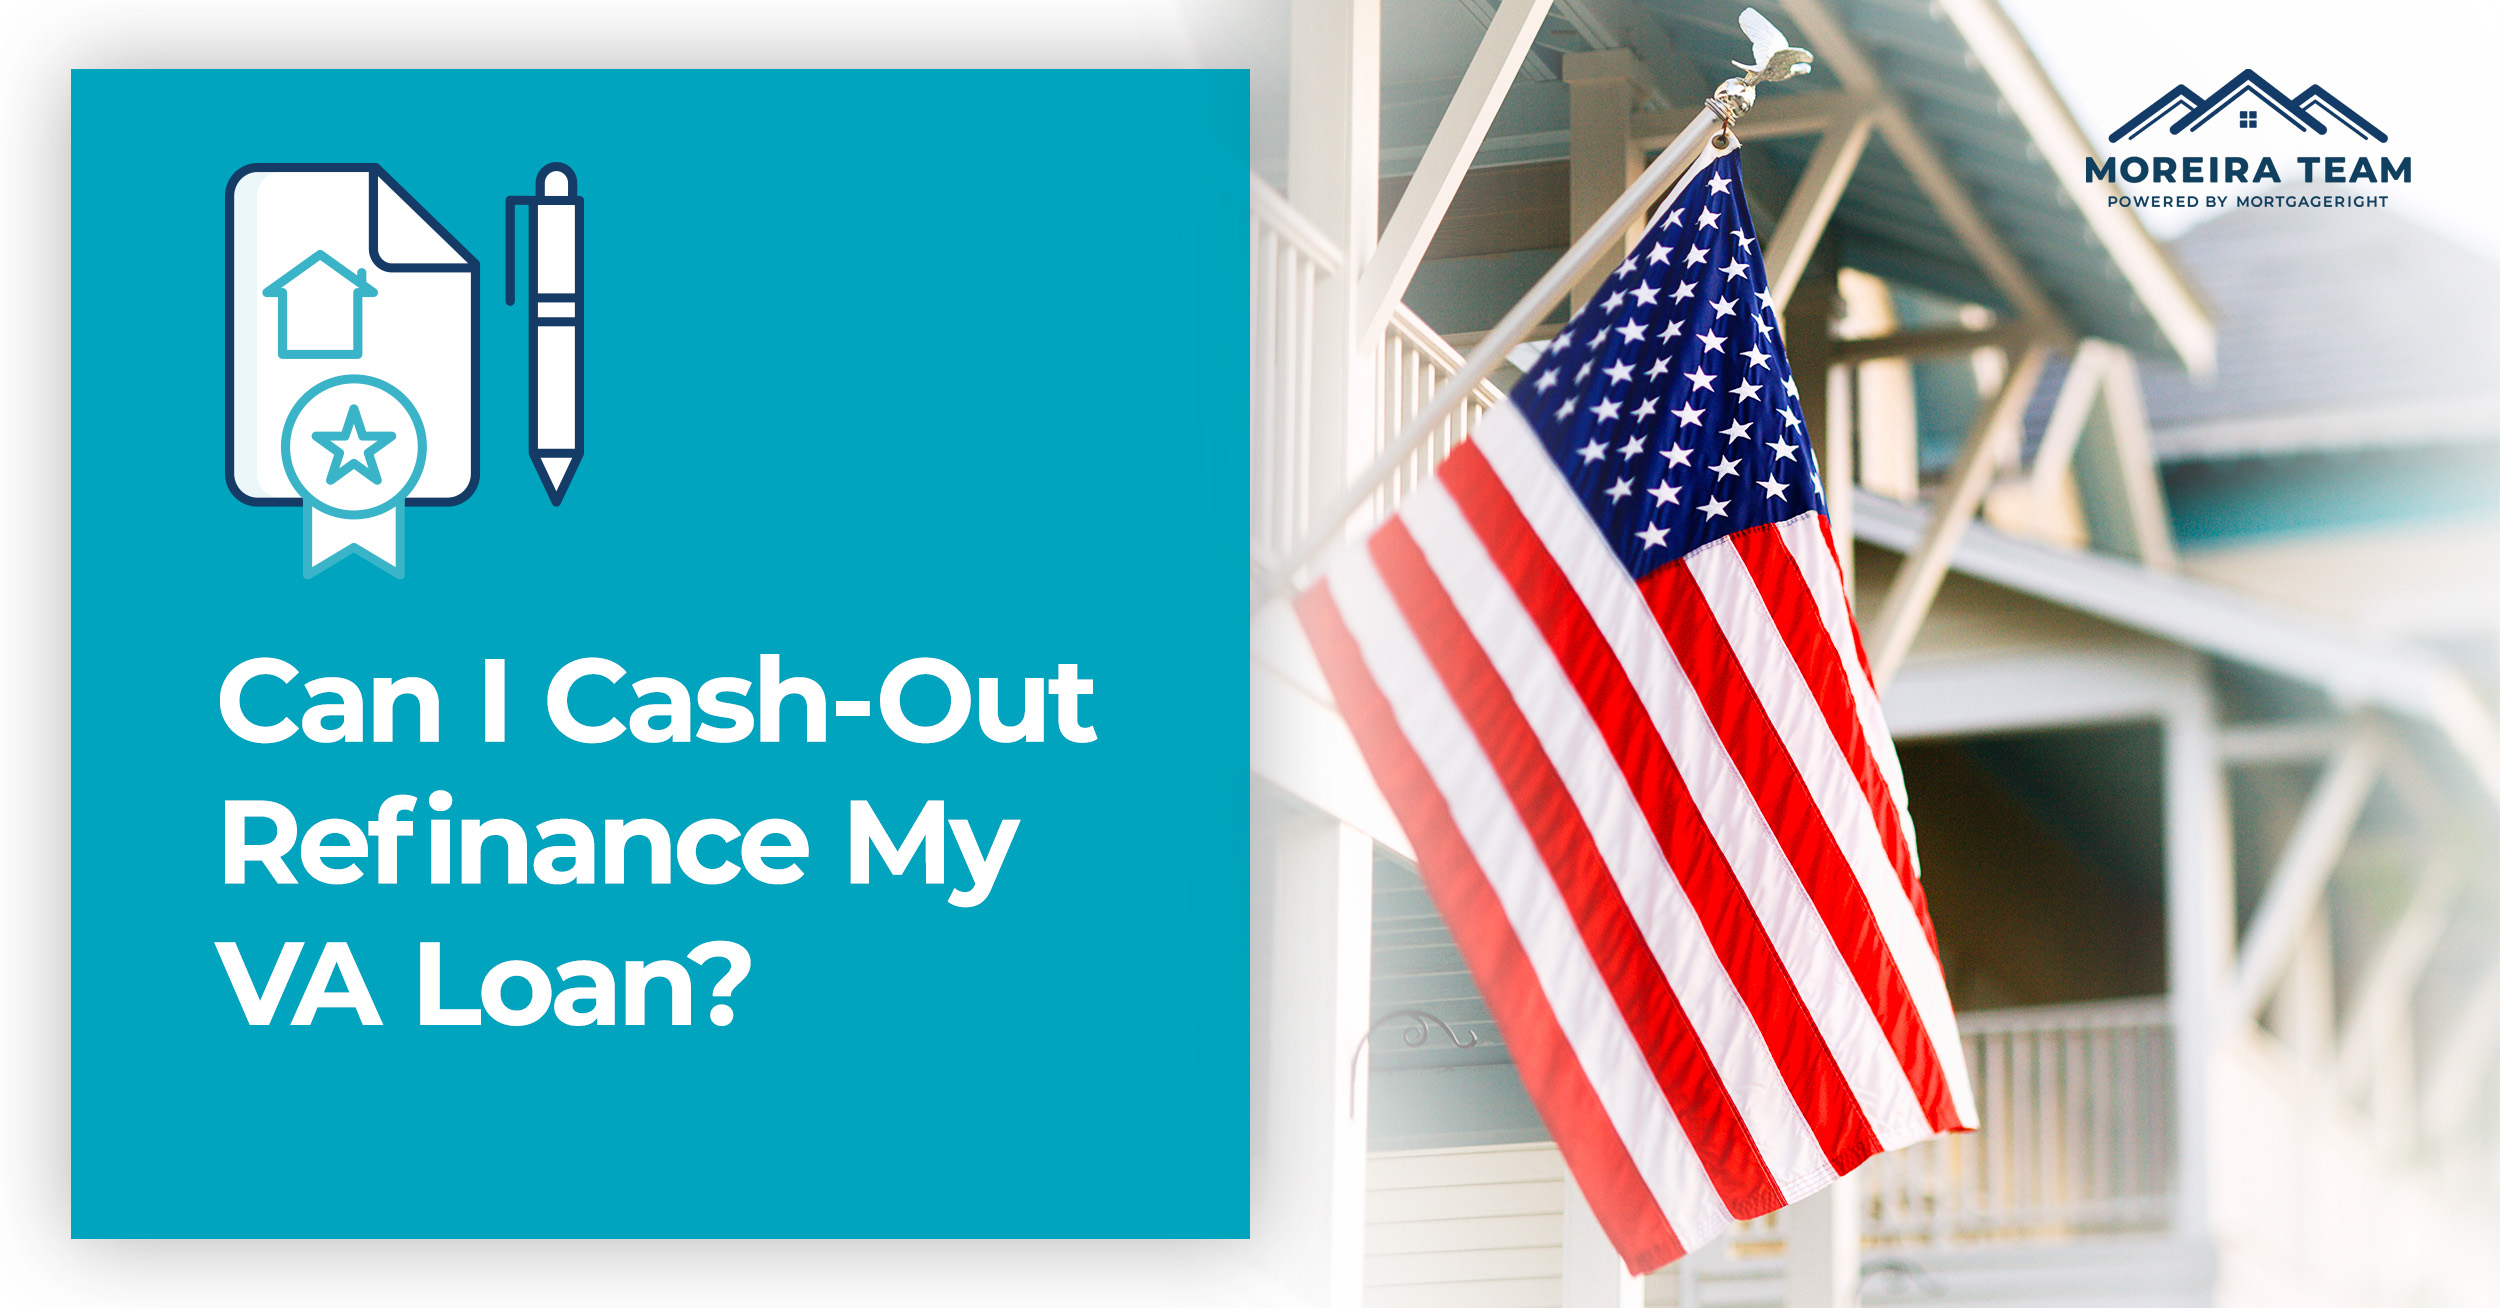 Can I Cash-Out Refinance My VA Loan?